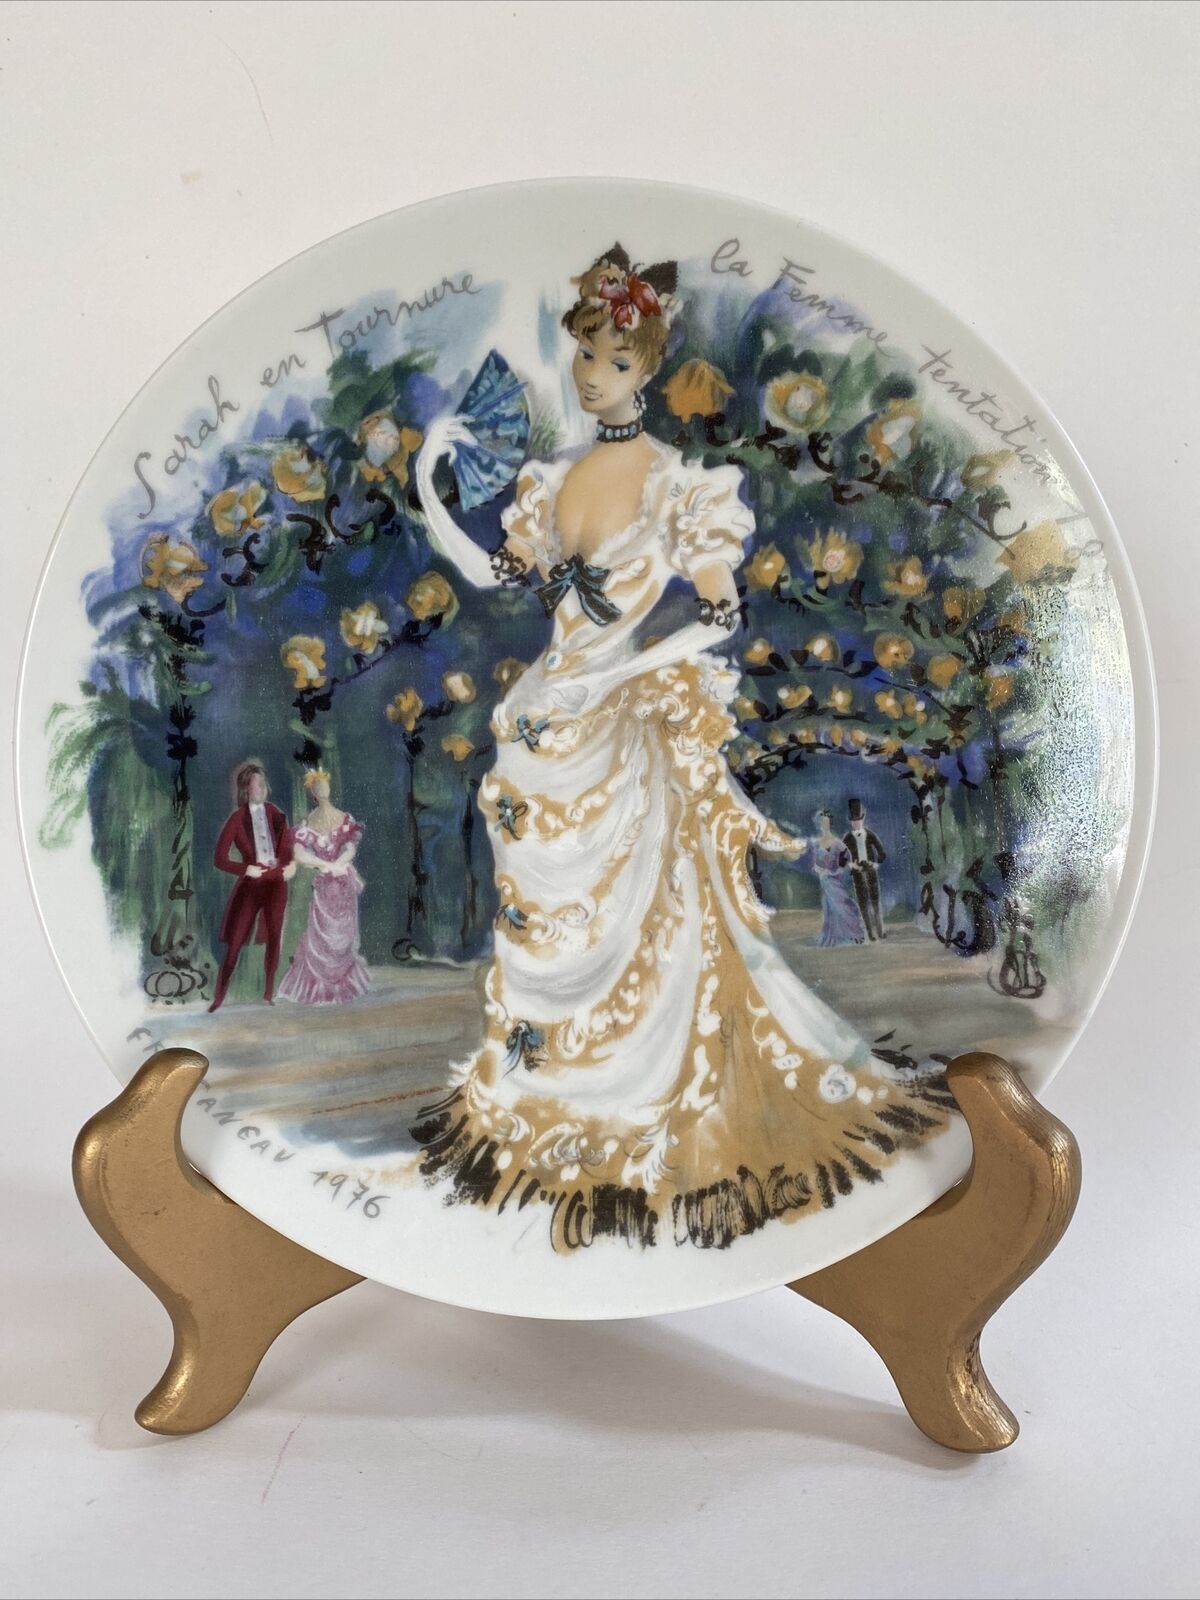 Women Of The Century - Vtg Collector Plates Only 1-12 Ltd Series Limoges France